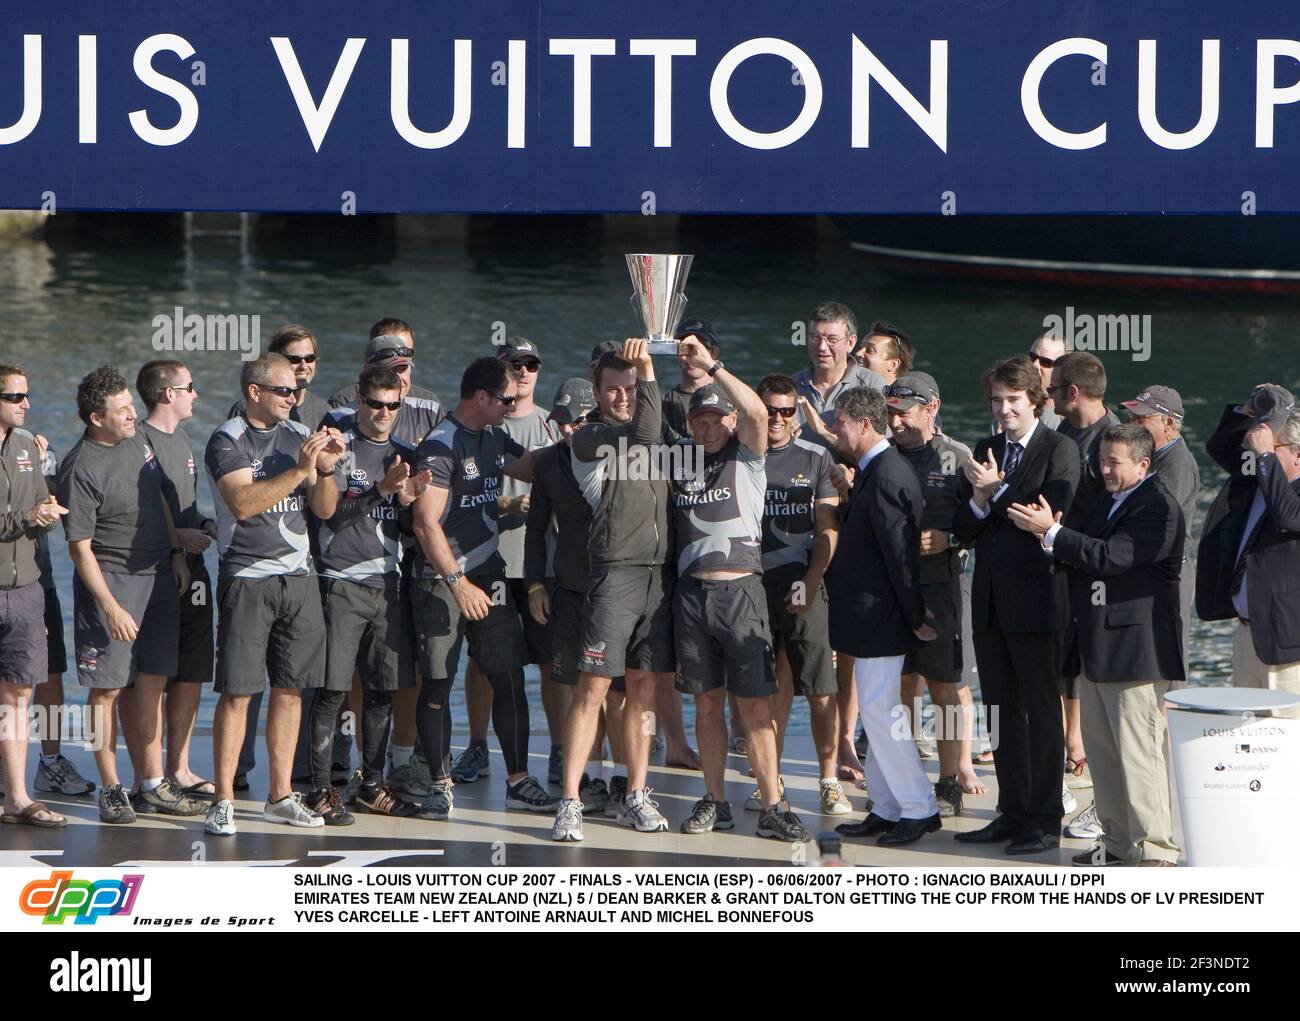 Louis Vuitton Cup- Image tribute to Yves Carcelle